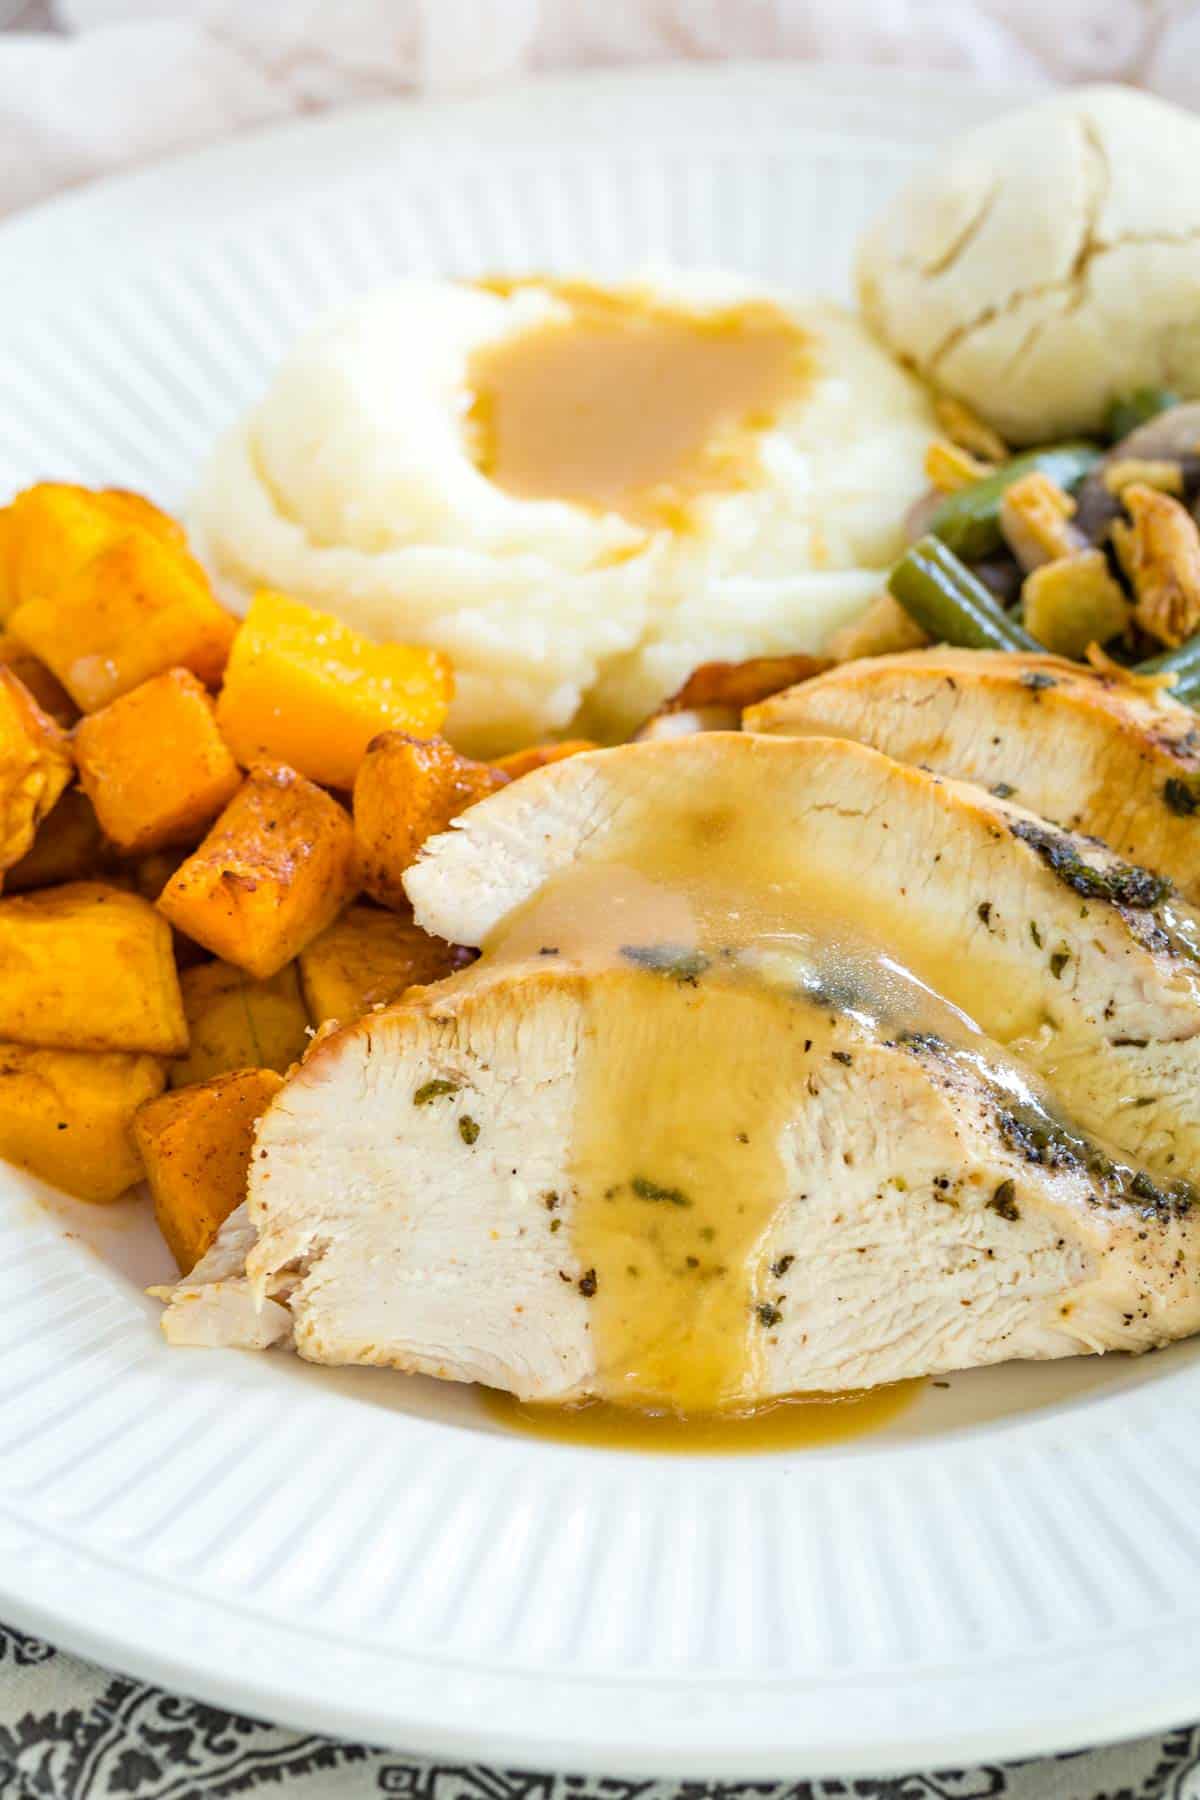 Slices of air fryer turkey with gravy on a white plate next to mashed potatoes, roasted butternut, and green bean casserole.